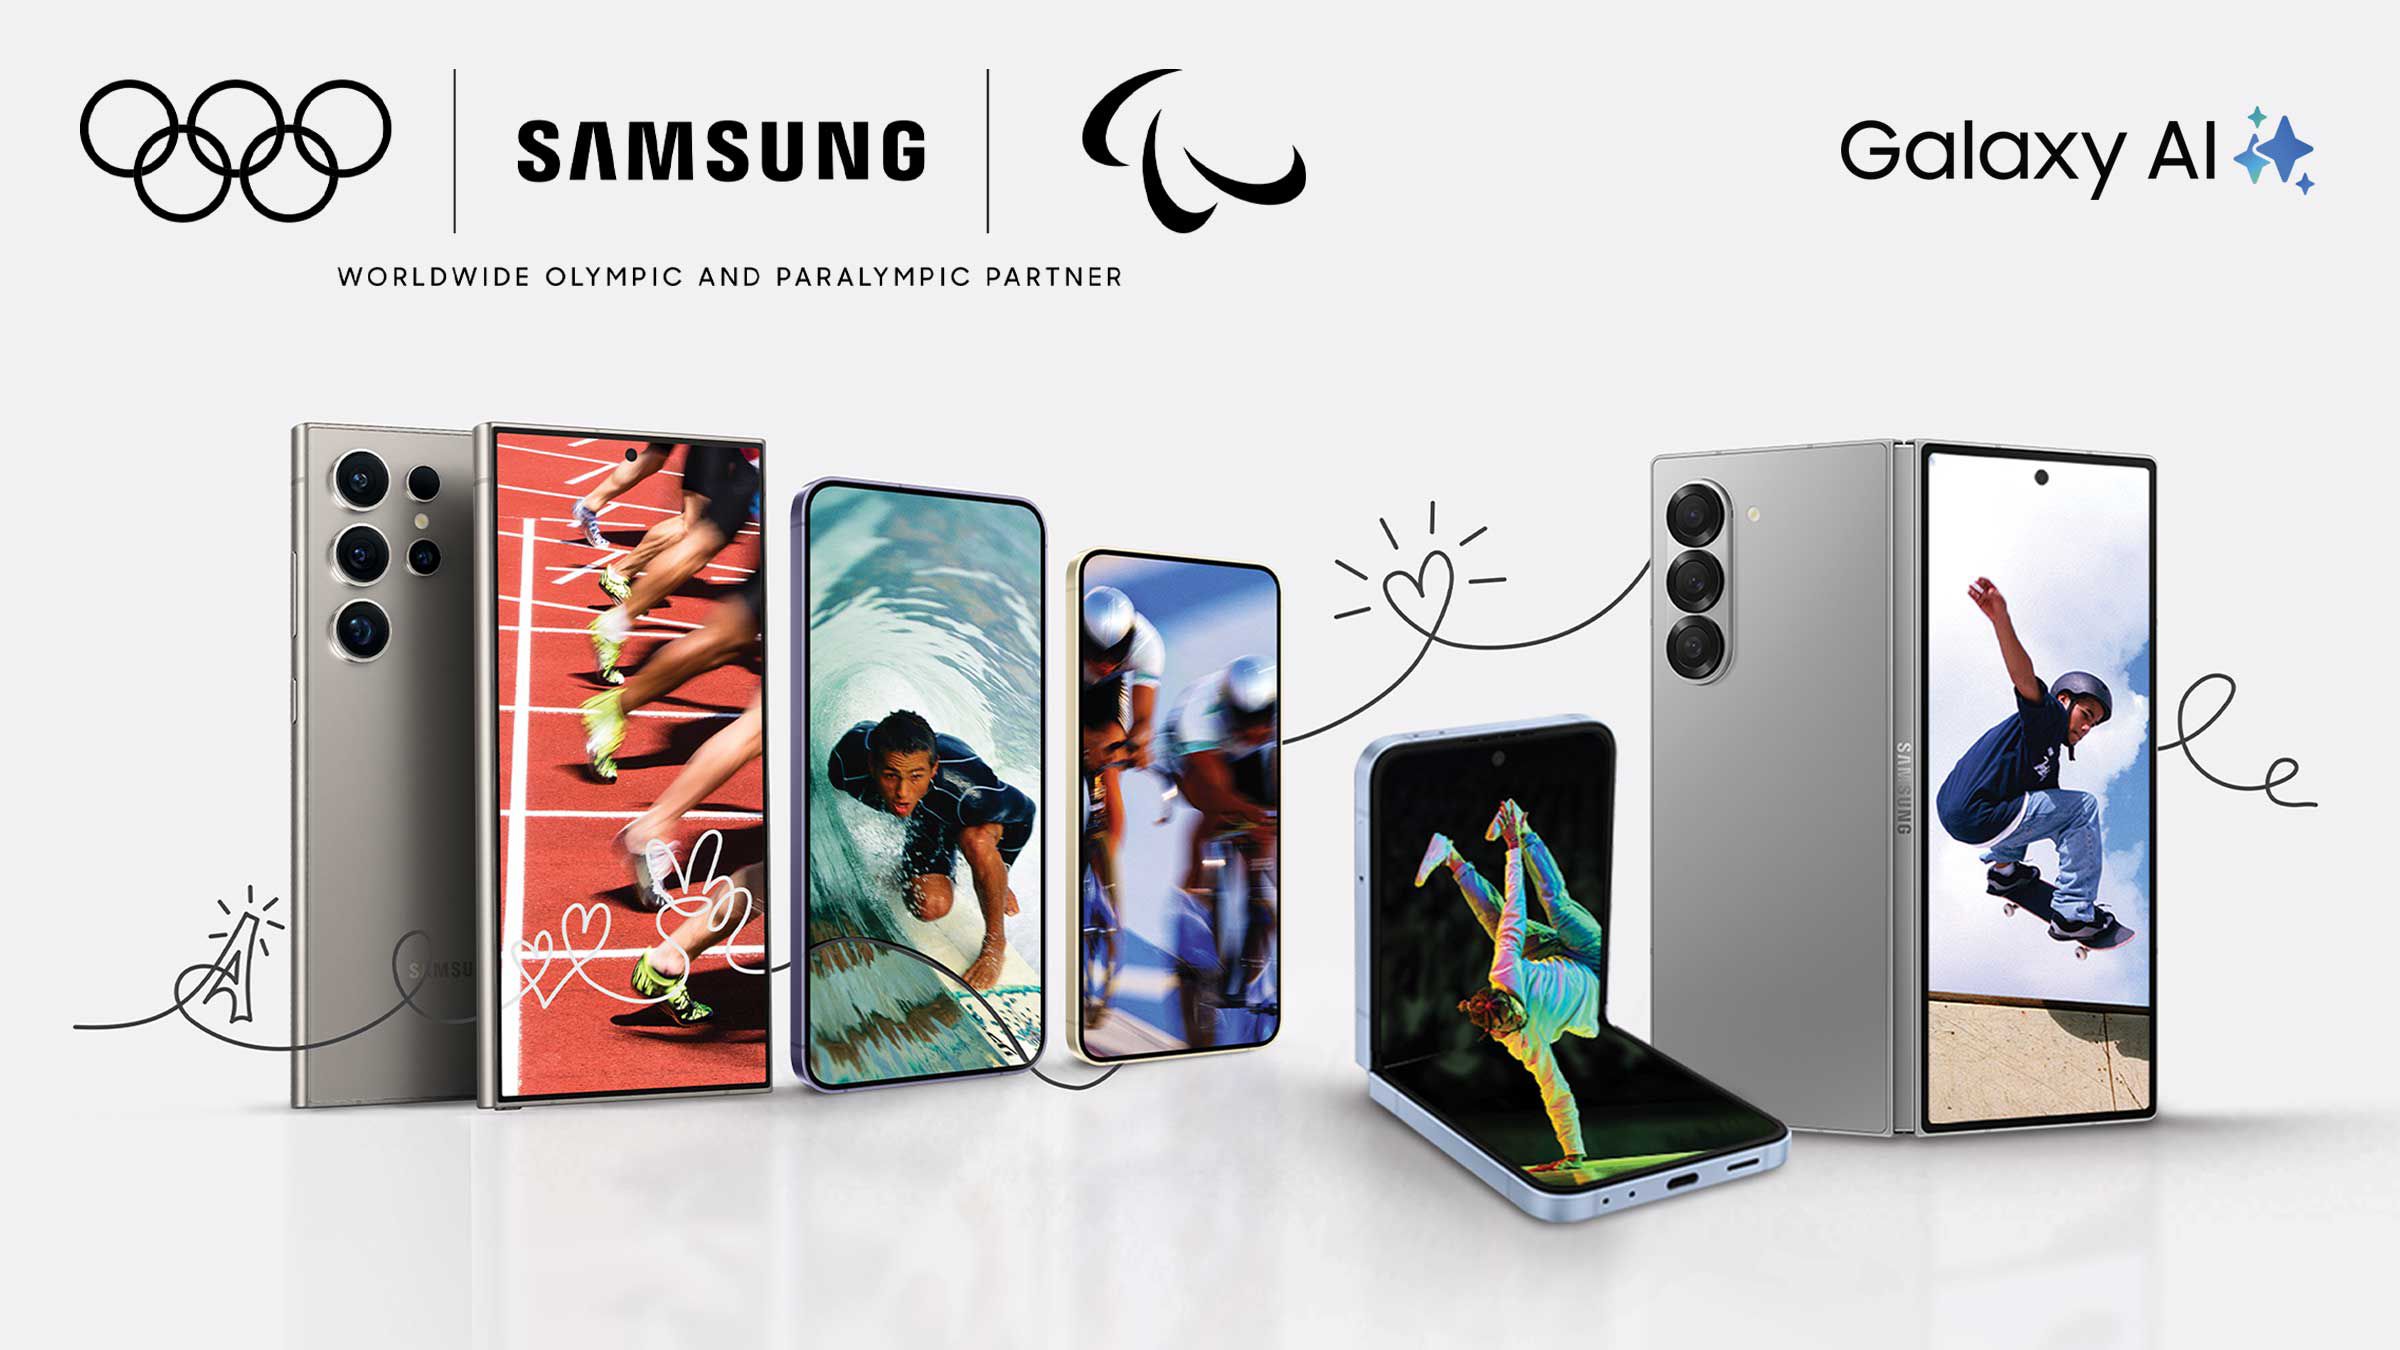 Samsung mobile products